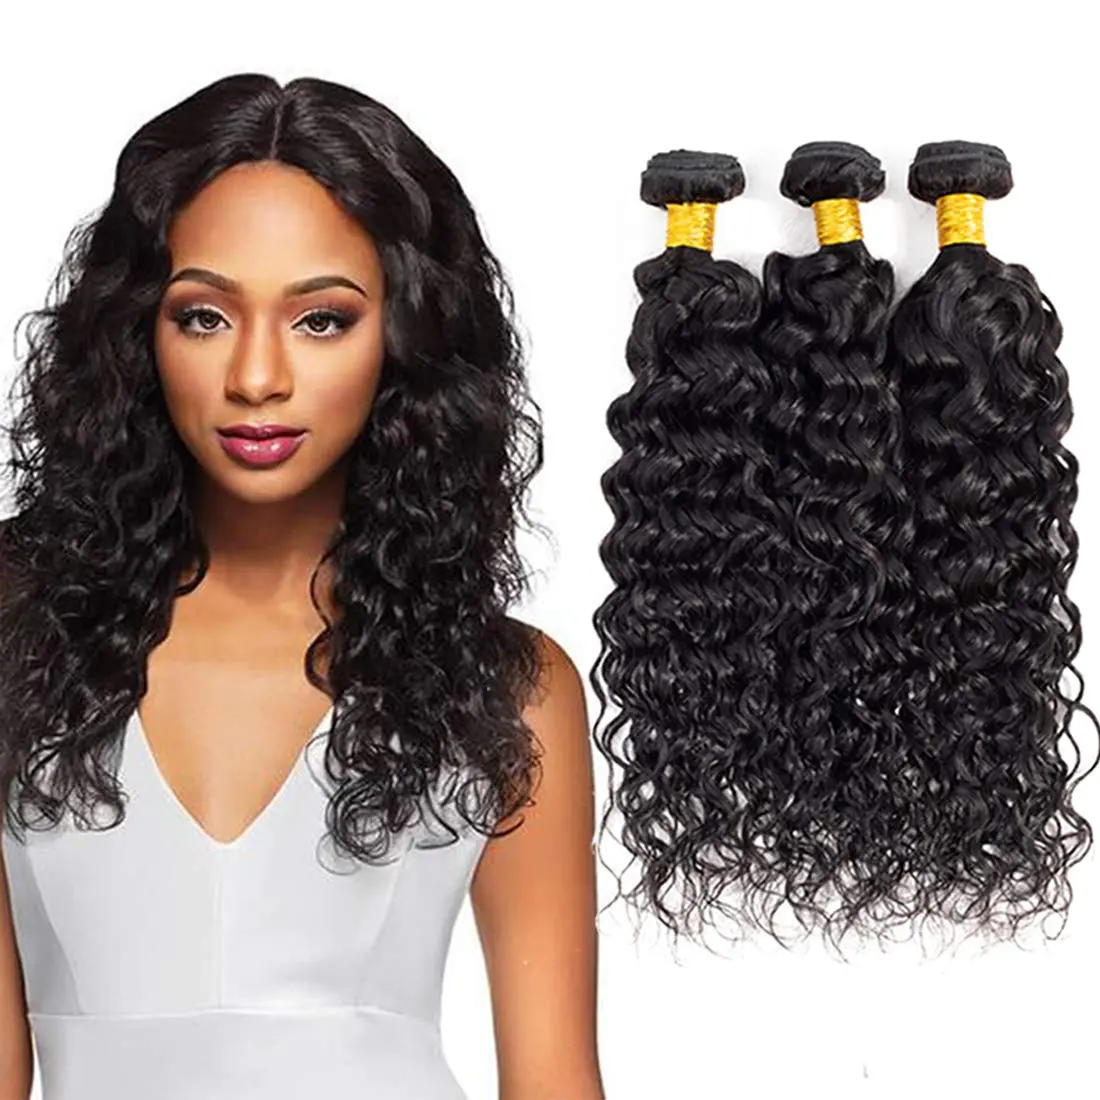 Water Curly Wave Bundles Set Hair Extensions Brazilian Human Hair Bundles Closure and Frontal Straight Hair Bundle With Closure